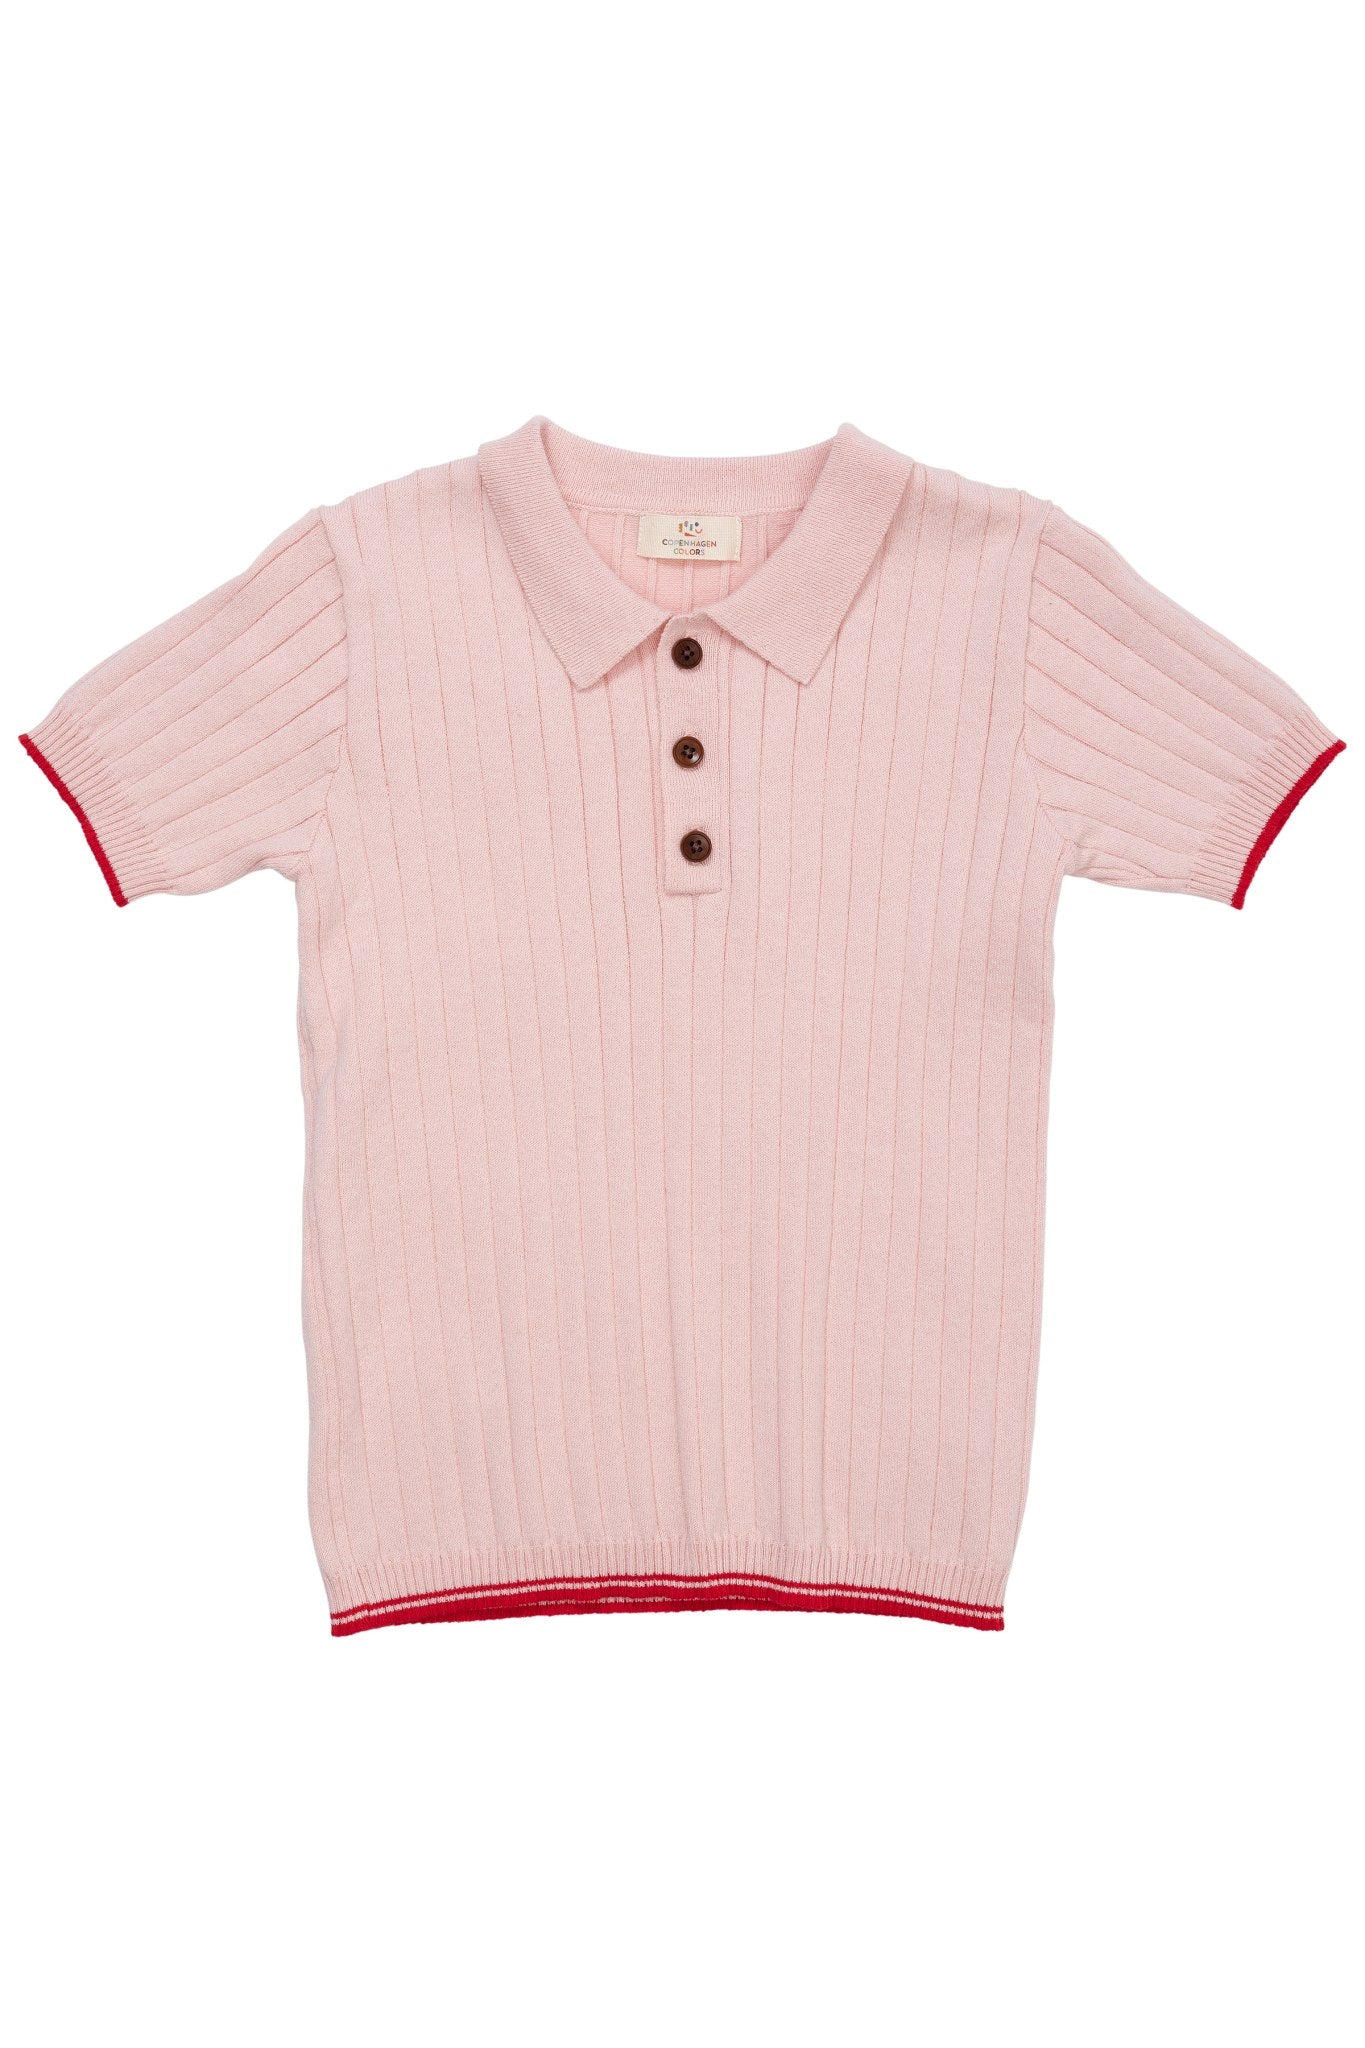 RIB KNITTED POLO - DUSTY ROSE/RED COMB.